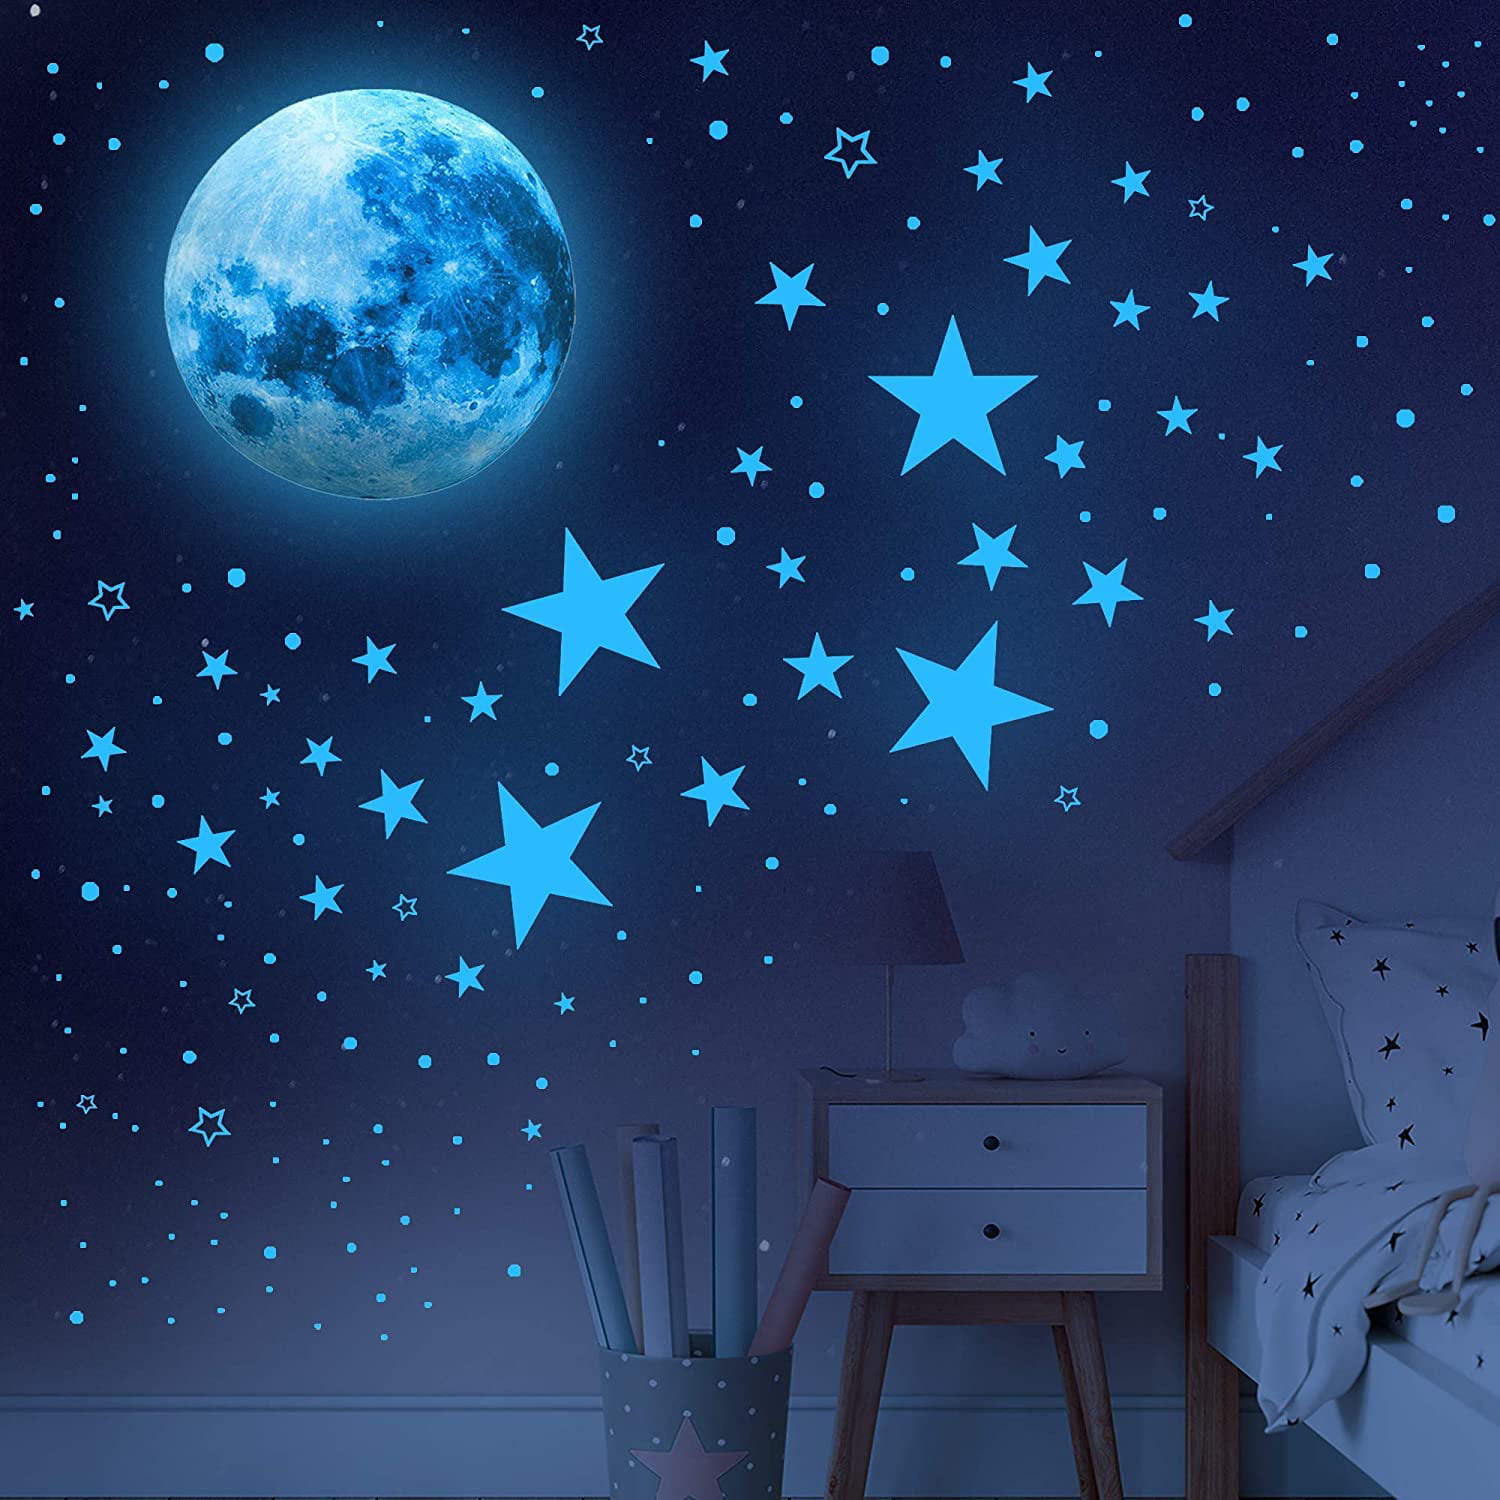 Glowing Ceiling Decals with The Moon Stars Unicorns LUISTUL 1622 Pcs Glow in The Dark Stars Wall Stickers Shining Space Decoration Fairies and dots for Kids Bedroom Any Room 